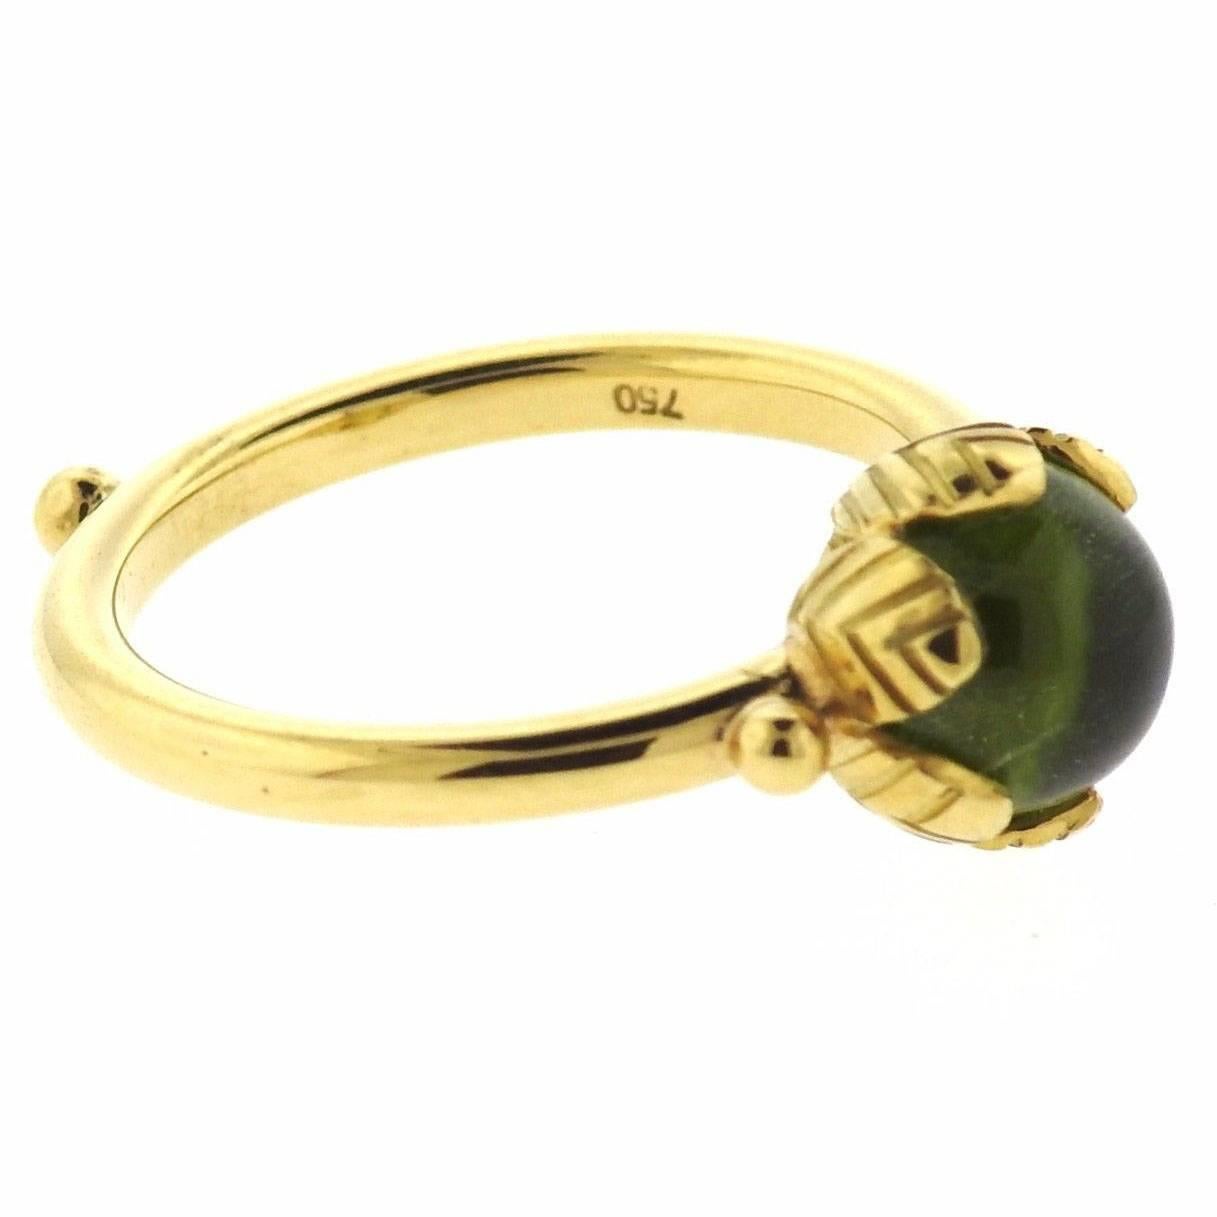 An 18k yellow gold ring set with peridot.  The ring is a size 7.25, ring top is 9.5mm in diameter.  Marked: Temple Mark.  The weight of piece 1311 grams. Retail is $1950.